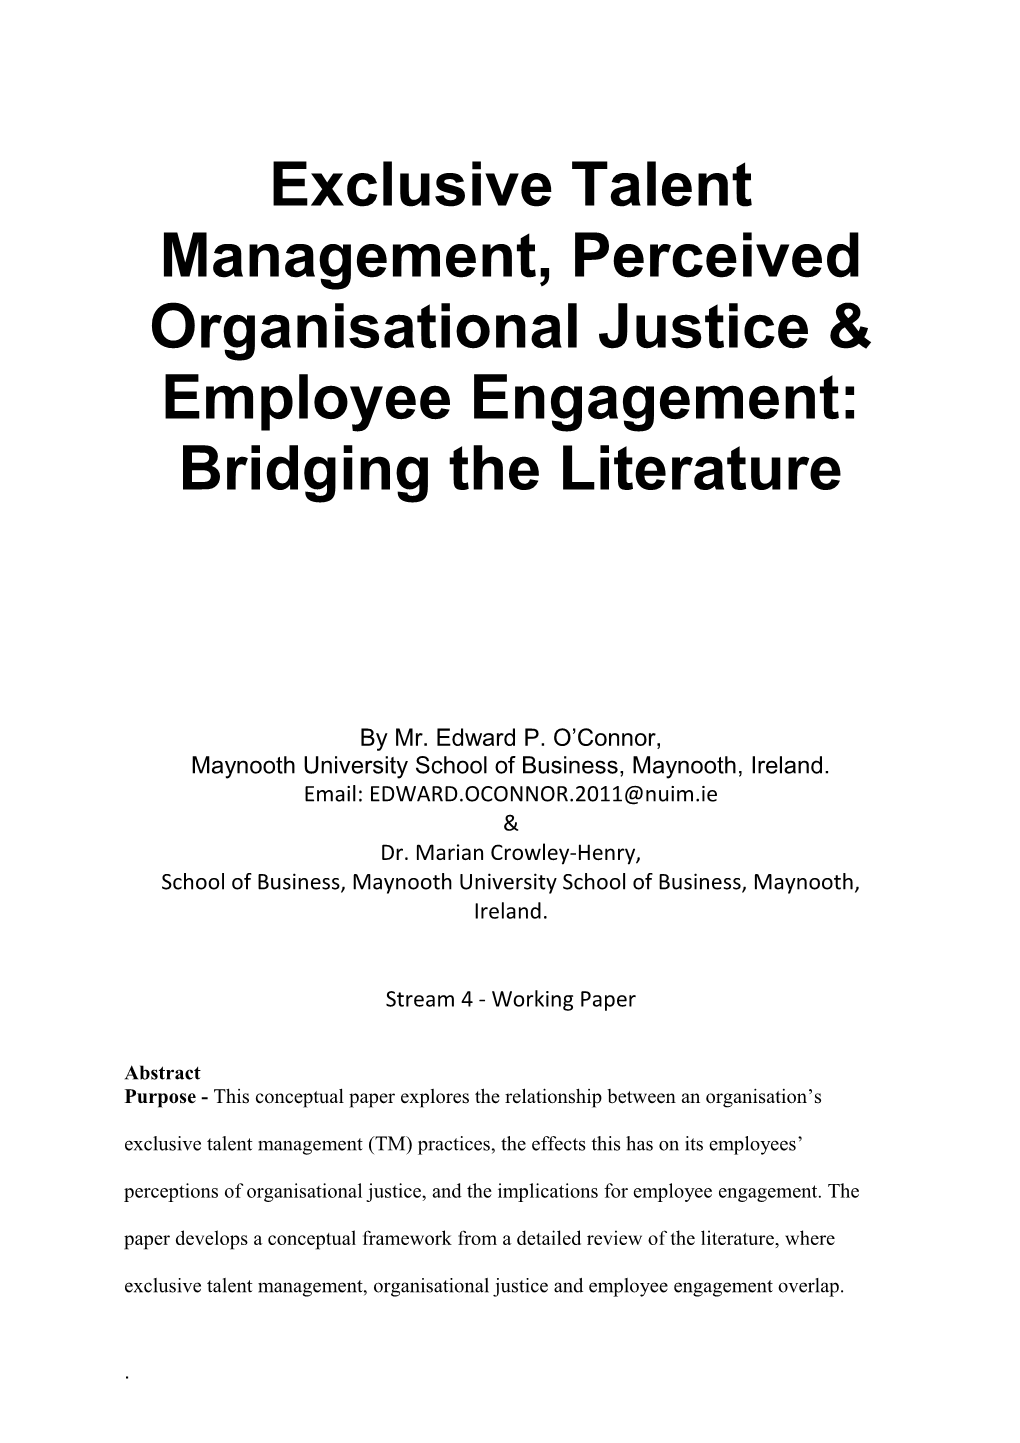 Exclusive Talent Management, Perceived Organisational Justice & Employee Engagement